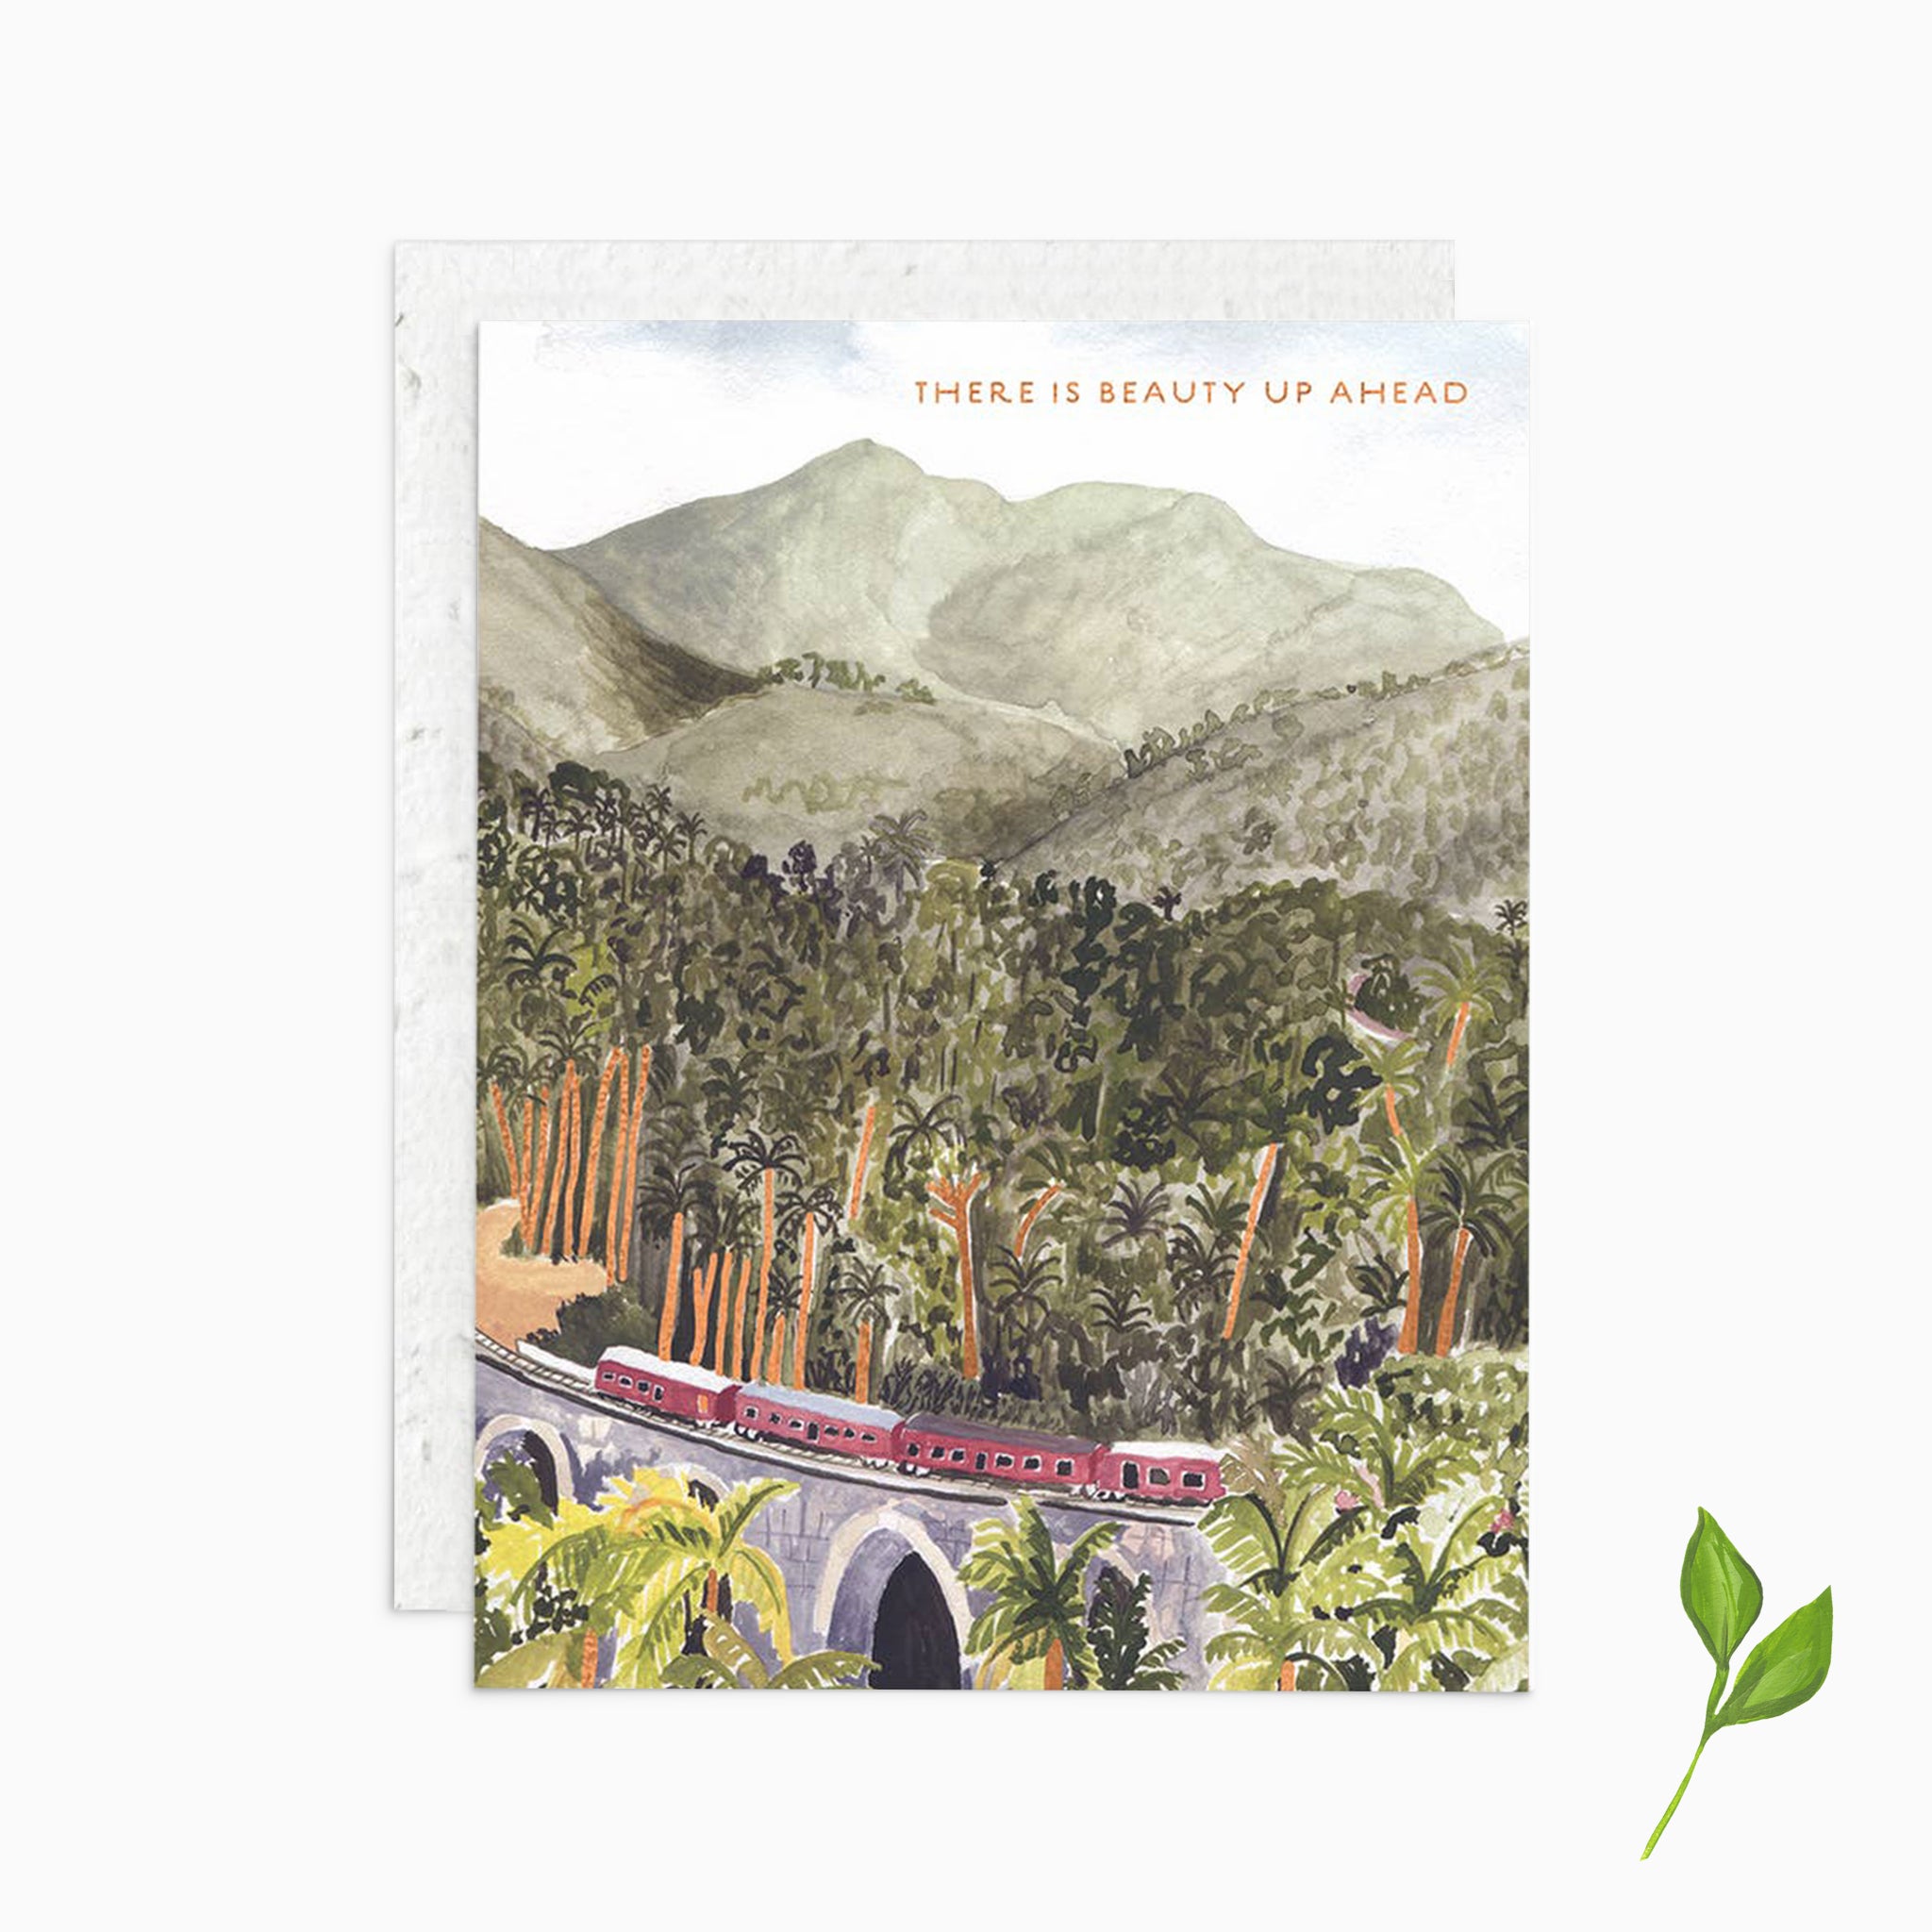 There is Beauty Up Ahead - Plantable Card